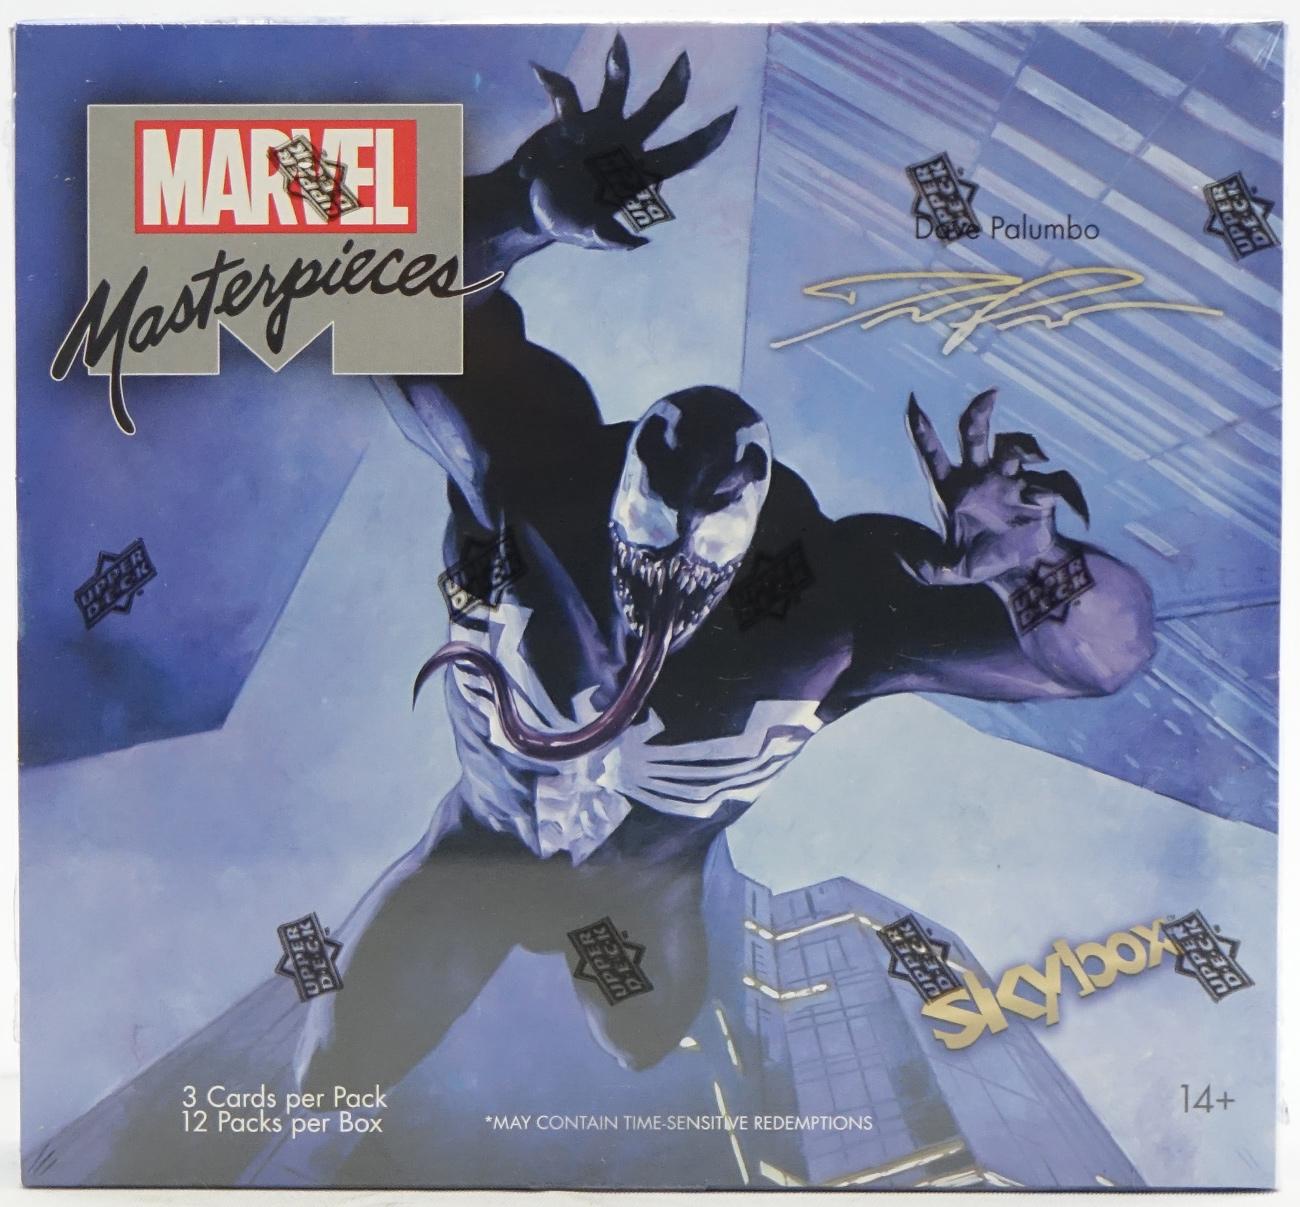 MARVEL MASTERPIECES (FEATURING DAVE PALUMBO) HOBBY BOX